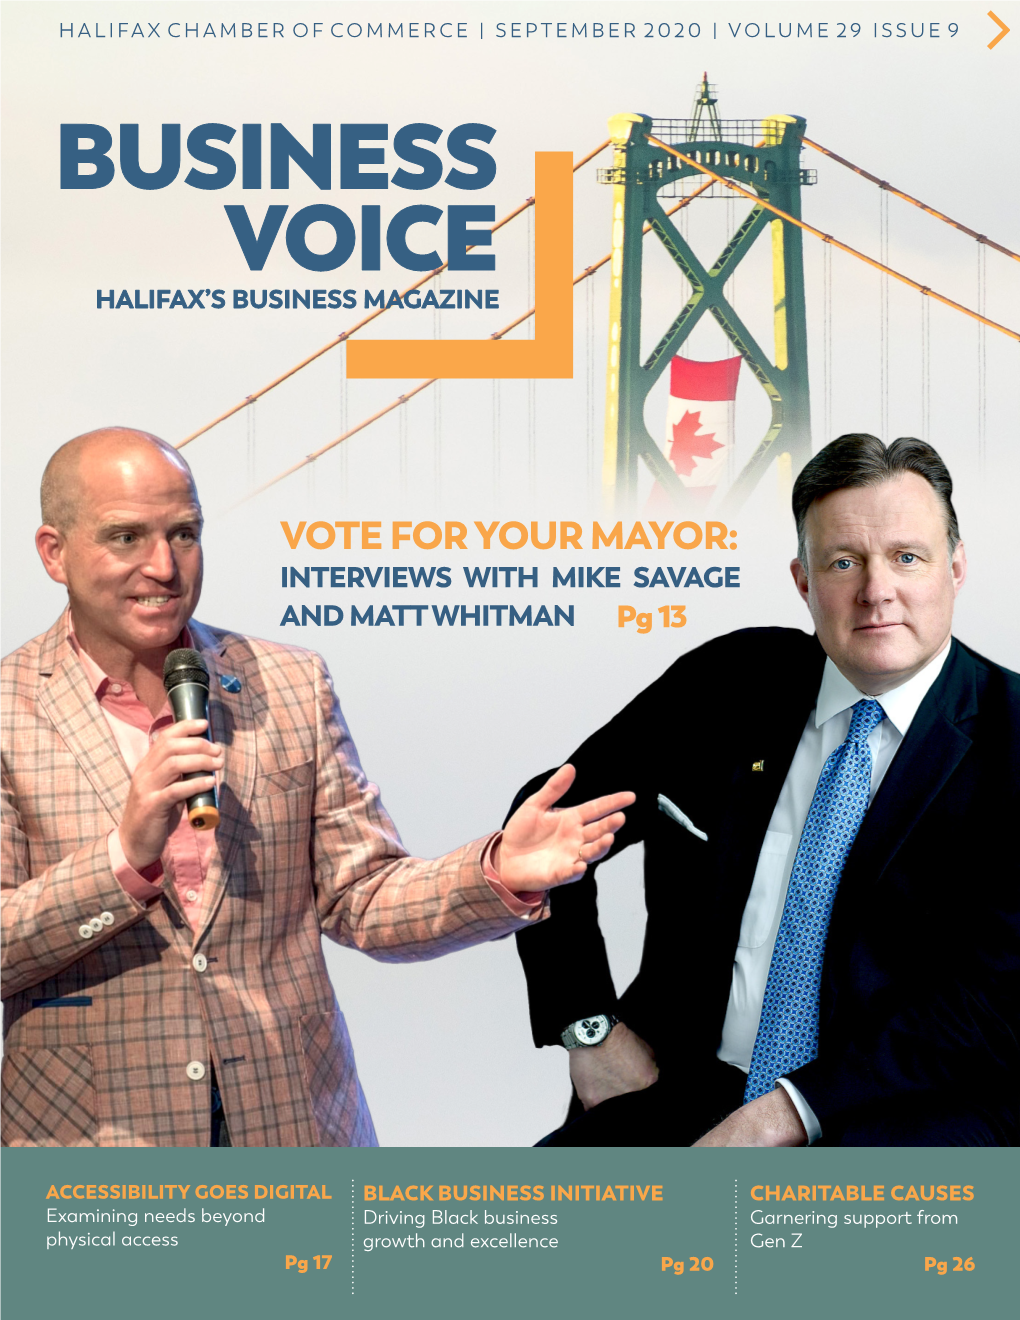 VOTE for YOUR MAYOR: INTERVIEWS with MIKE SAVAGE and MATT WHITMAN Pg 13